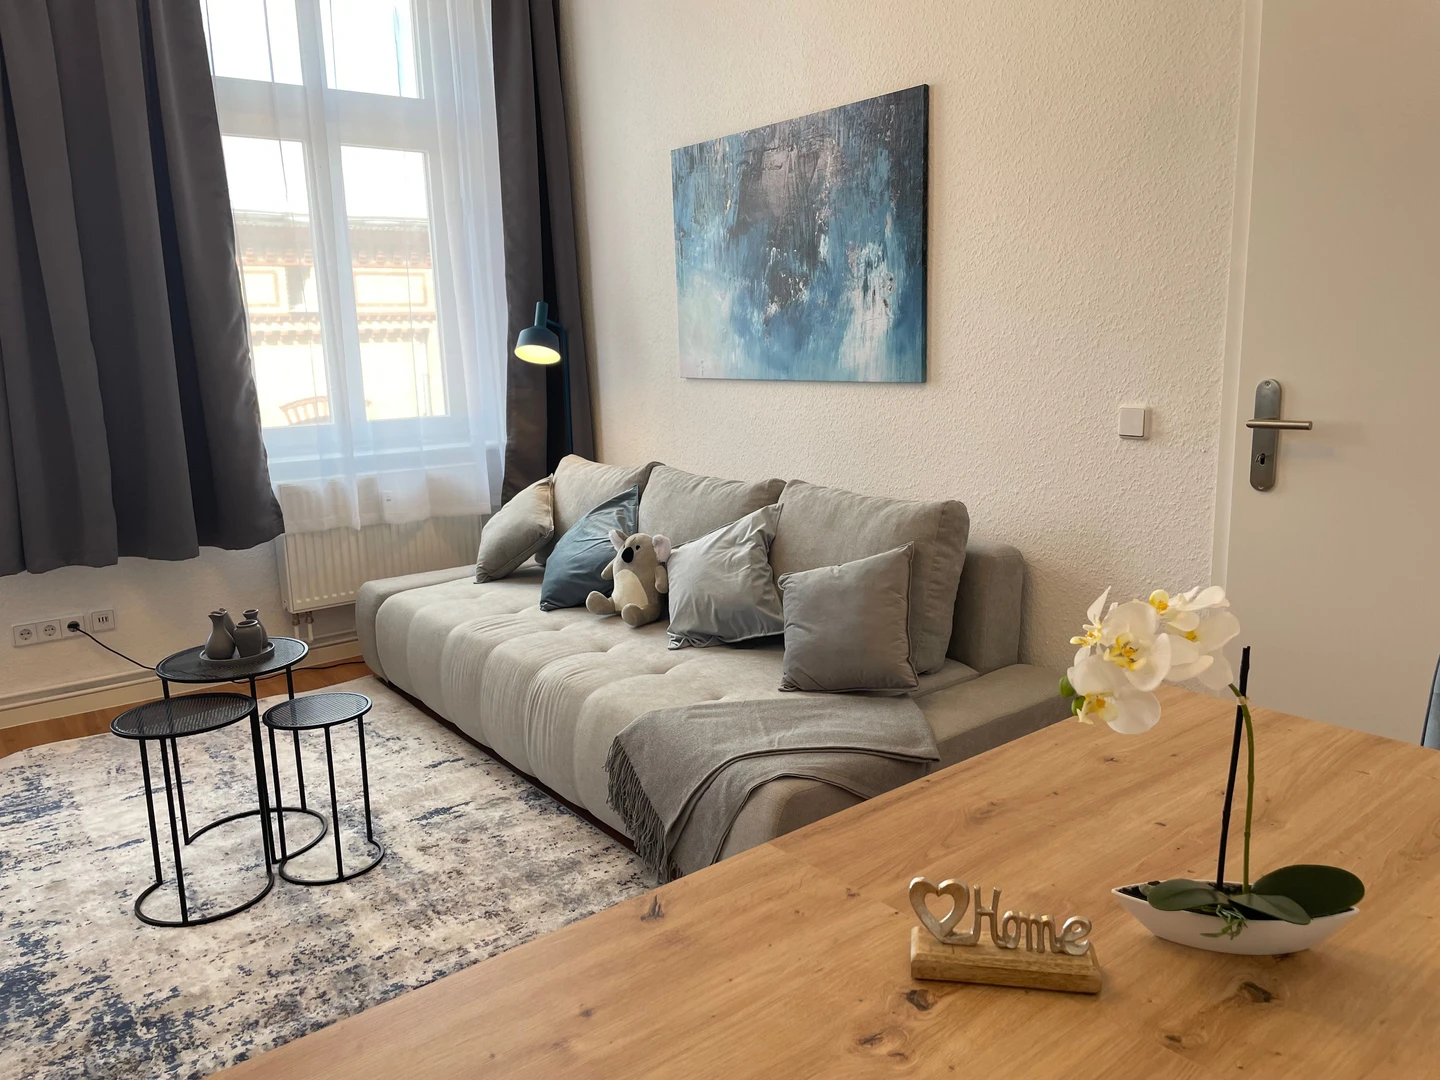 Room for rent in a shared flat in Magdeburg